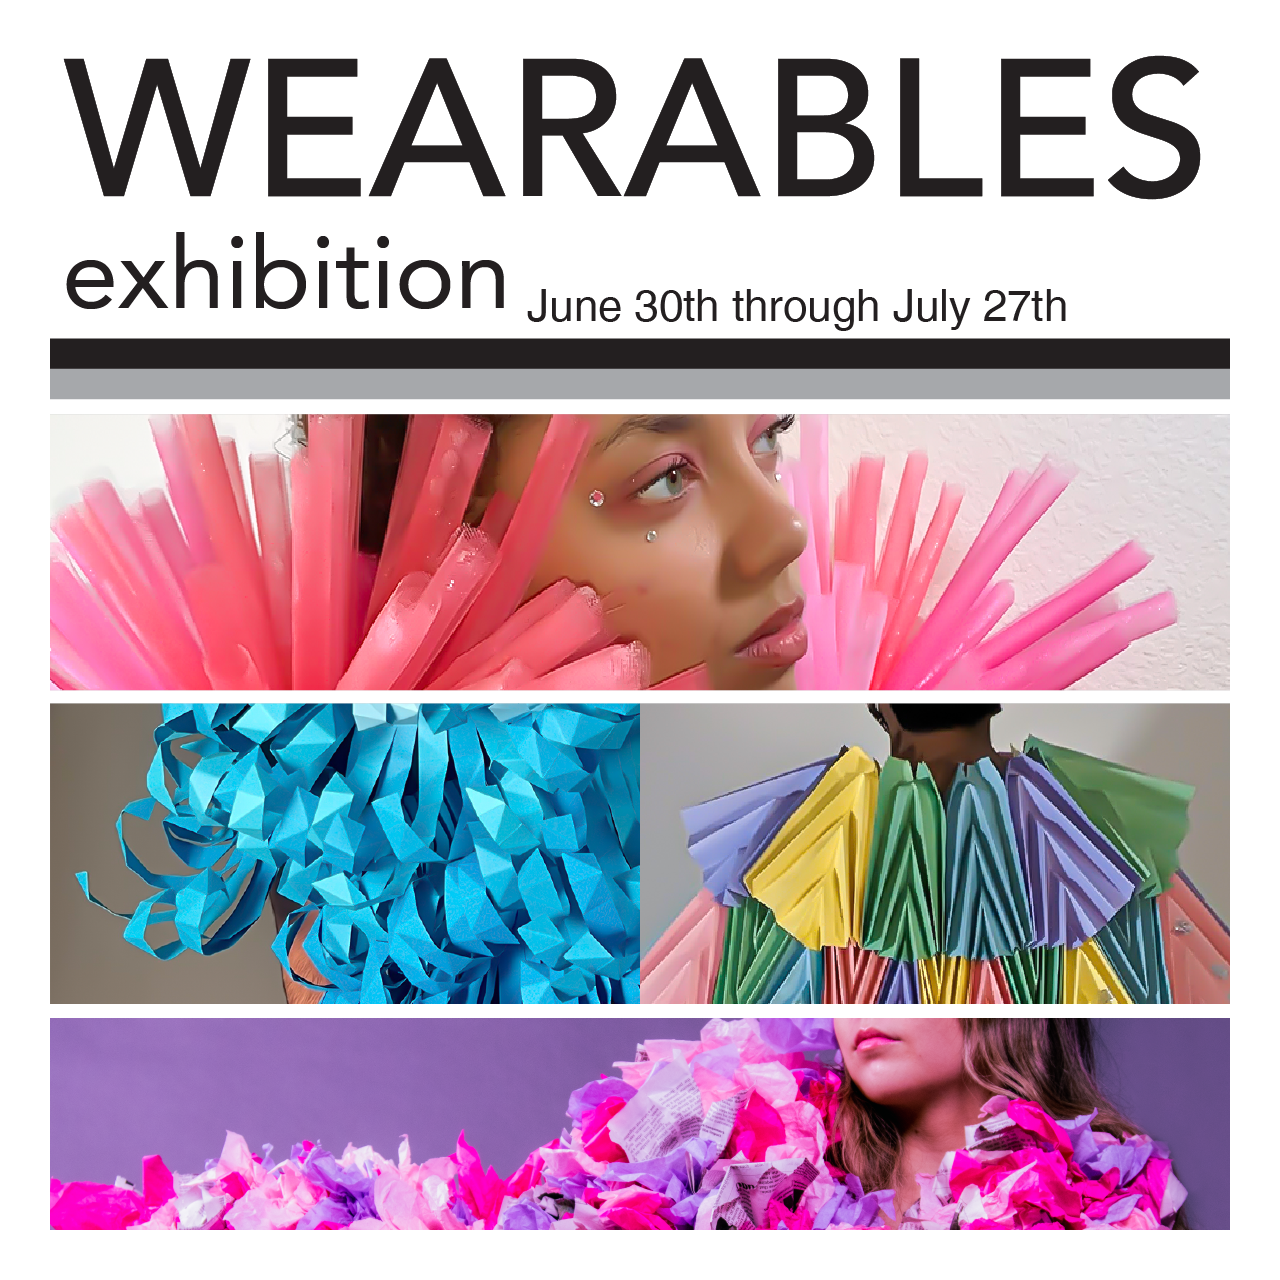 Wearables Exhibition June 30 - July 27